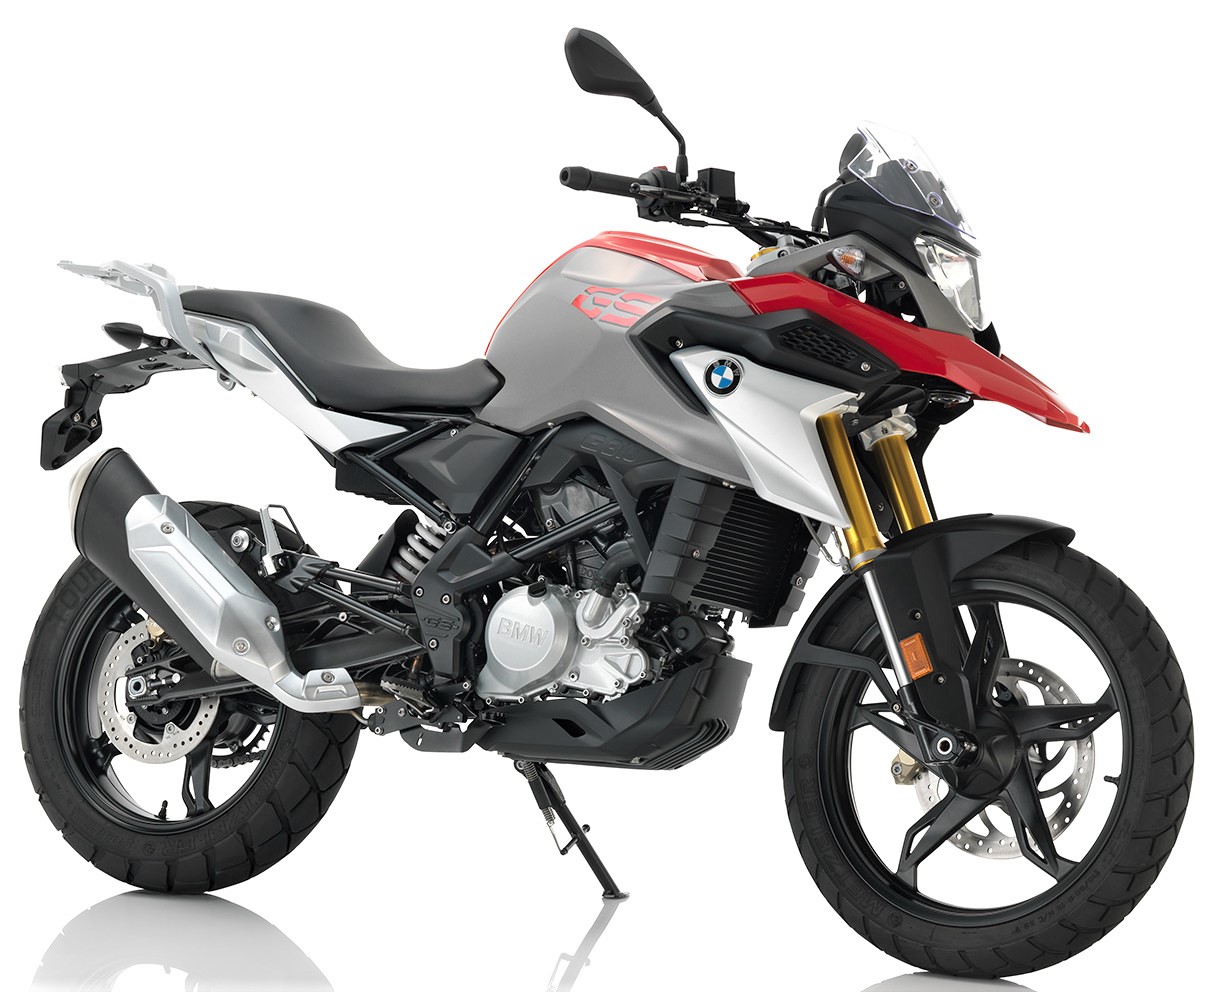 BMW G310GS Launched in India